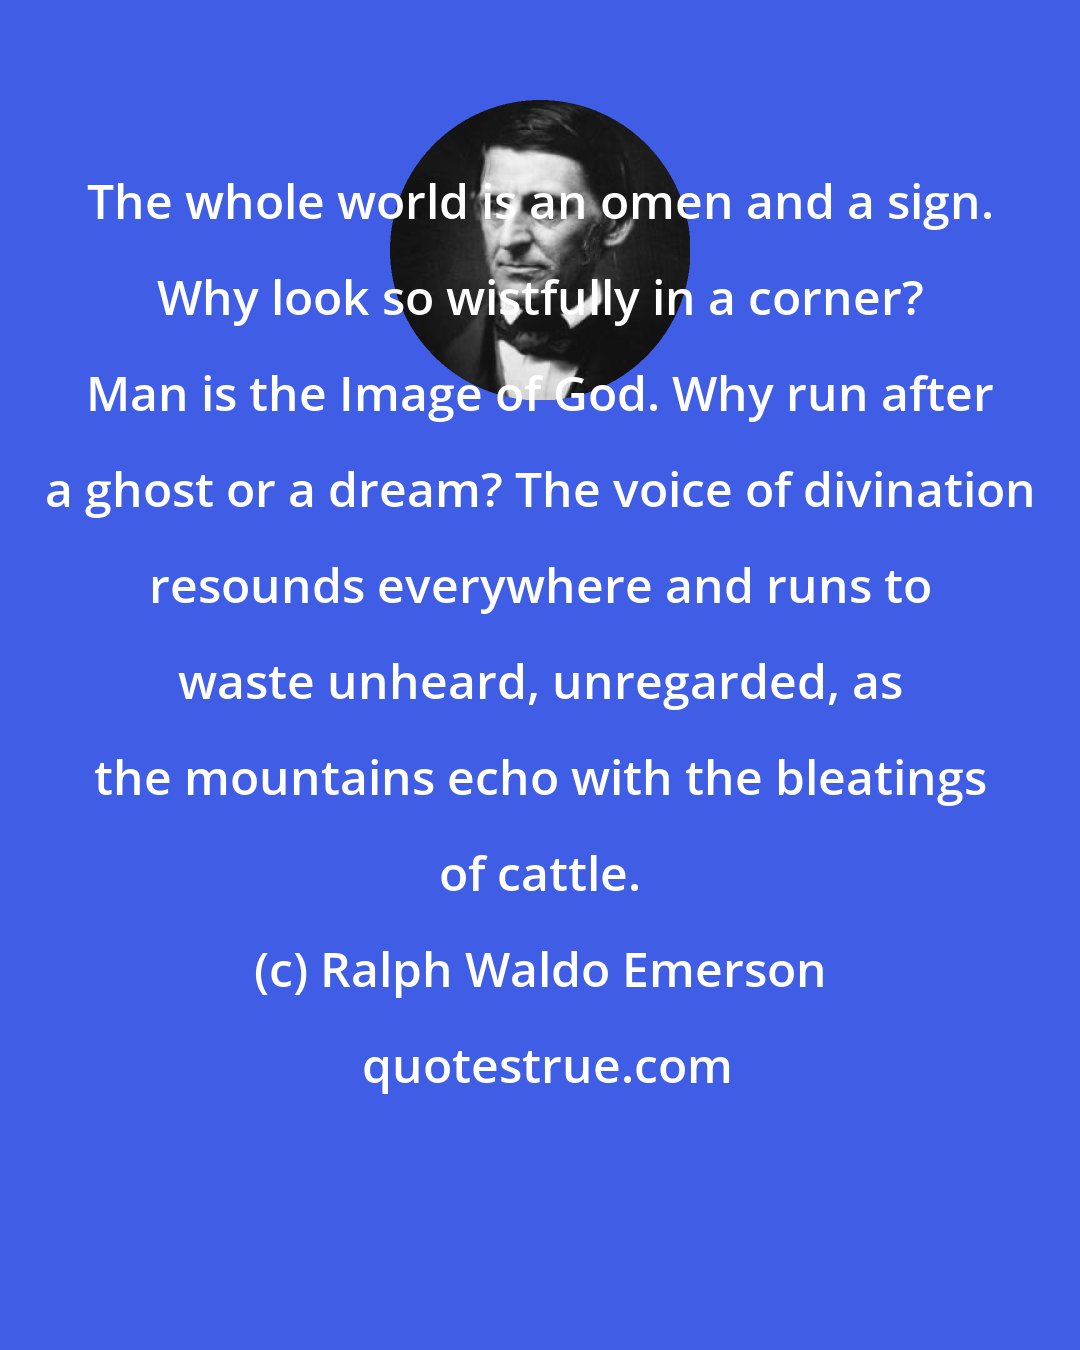 Ralph Waldo Emerson: The whole world is an omen and a sign. Why look so wistfully in a corner? Man is the Image of God. Why run after a ghost or a dream? The voice of divination resounds everywhere and runs to waste unheard, unregarded, as the mountains echo with the bleatings of cattle.